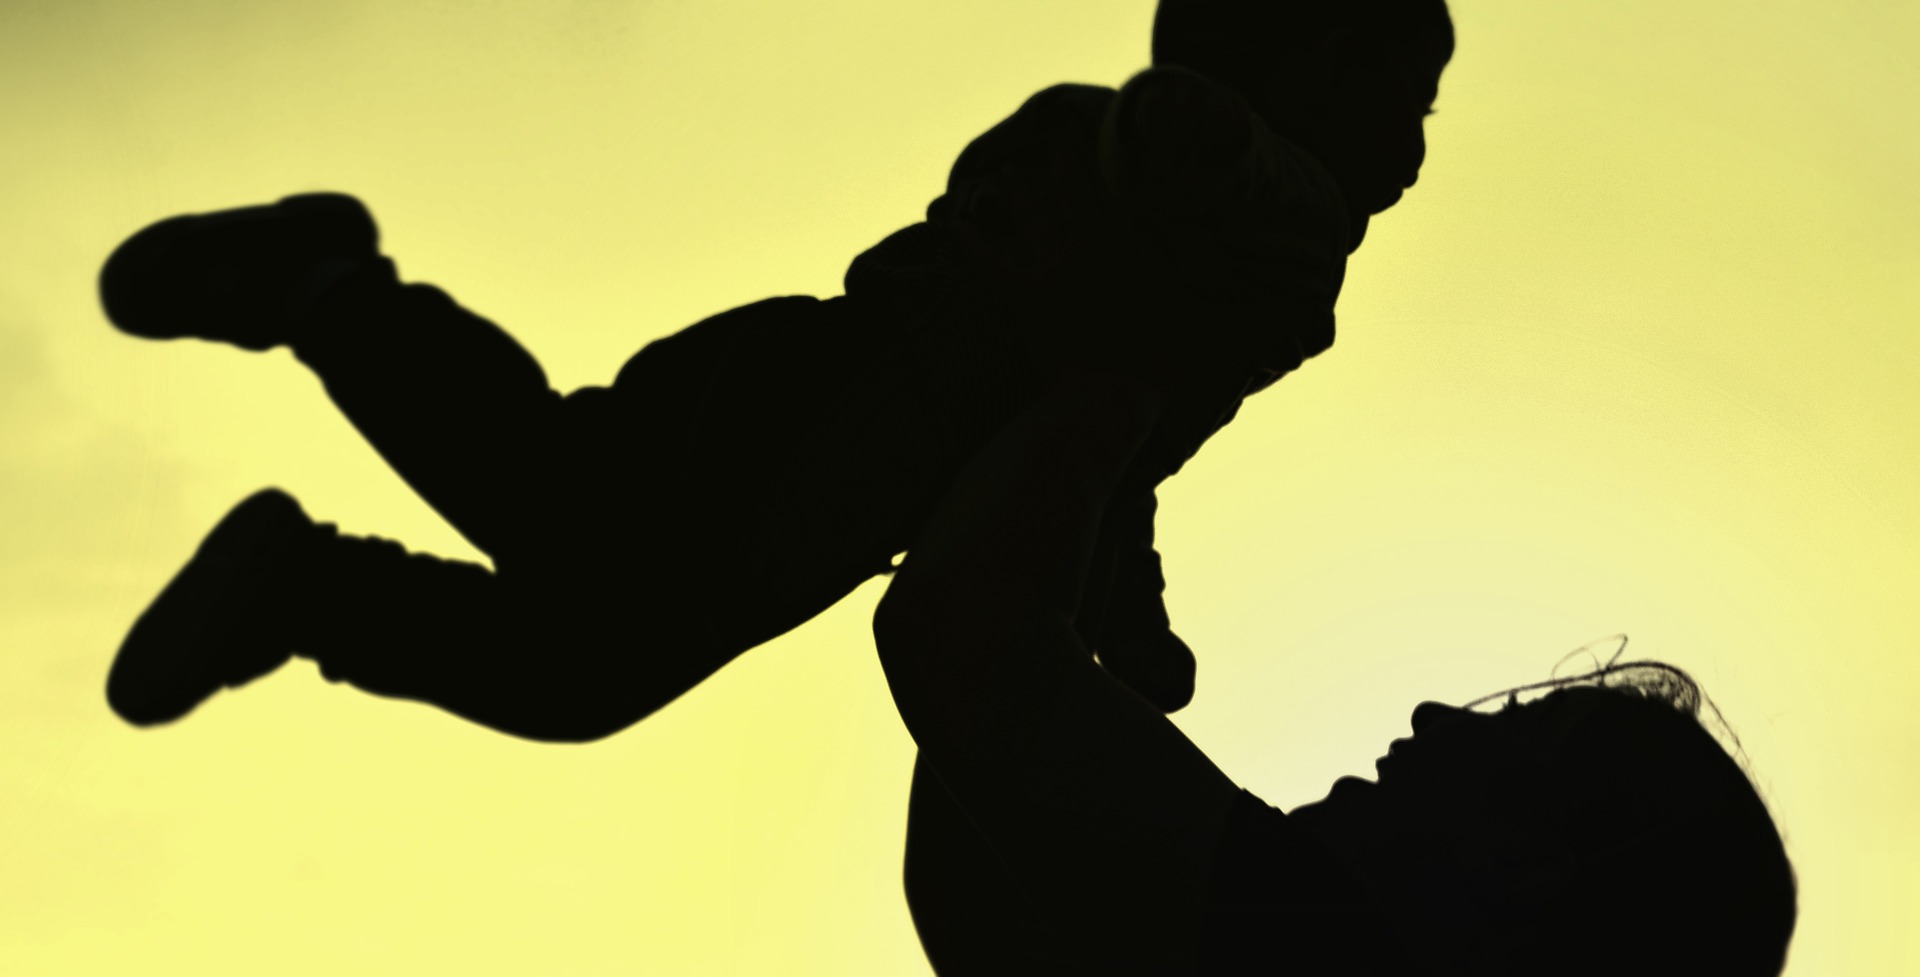 Silhouette of woman holding up child.